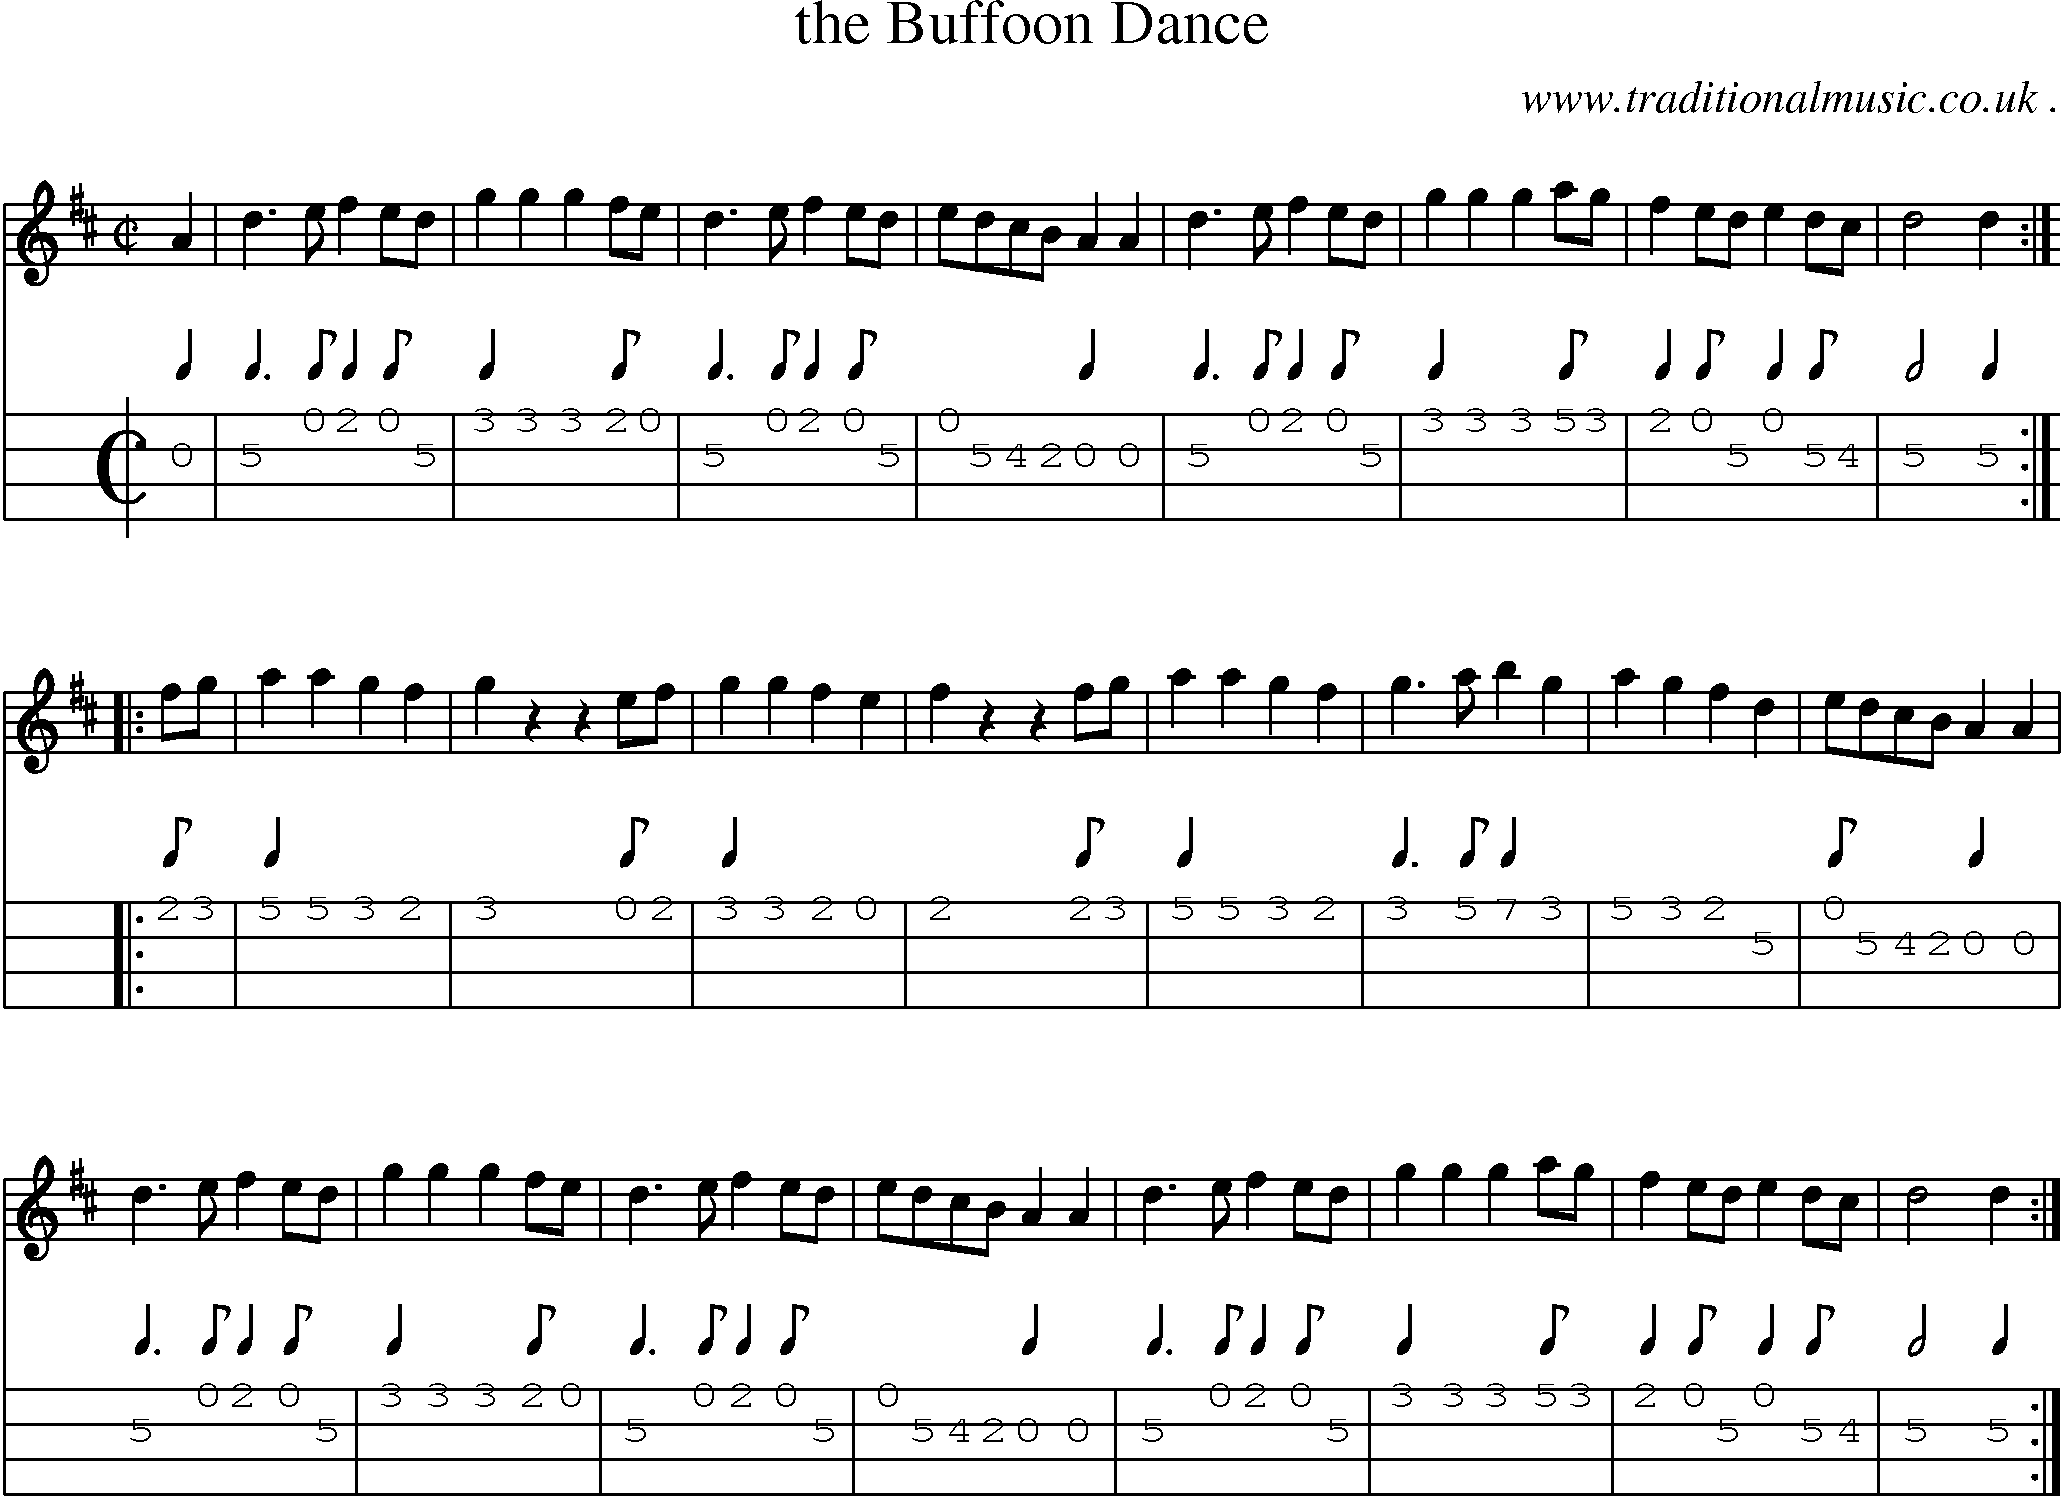 Sheet-Music and Mandolin Tabs for The Buffoon Dance